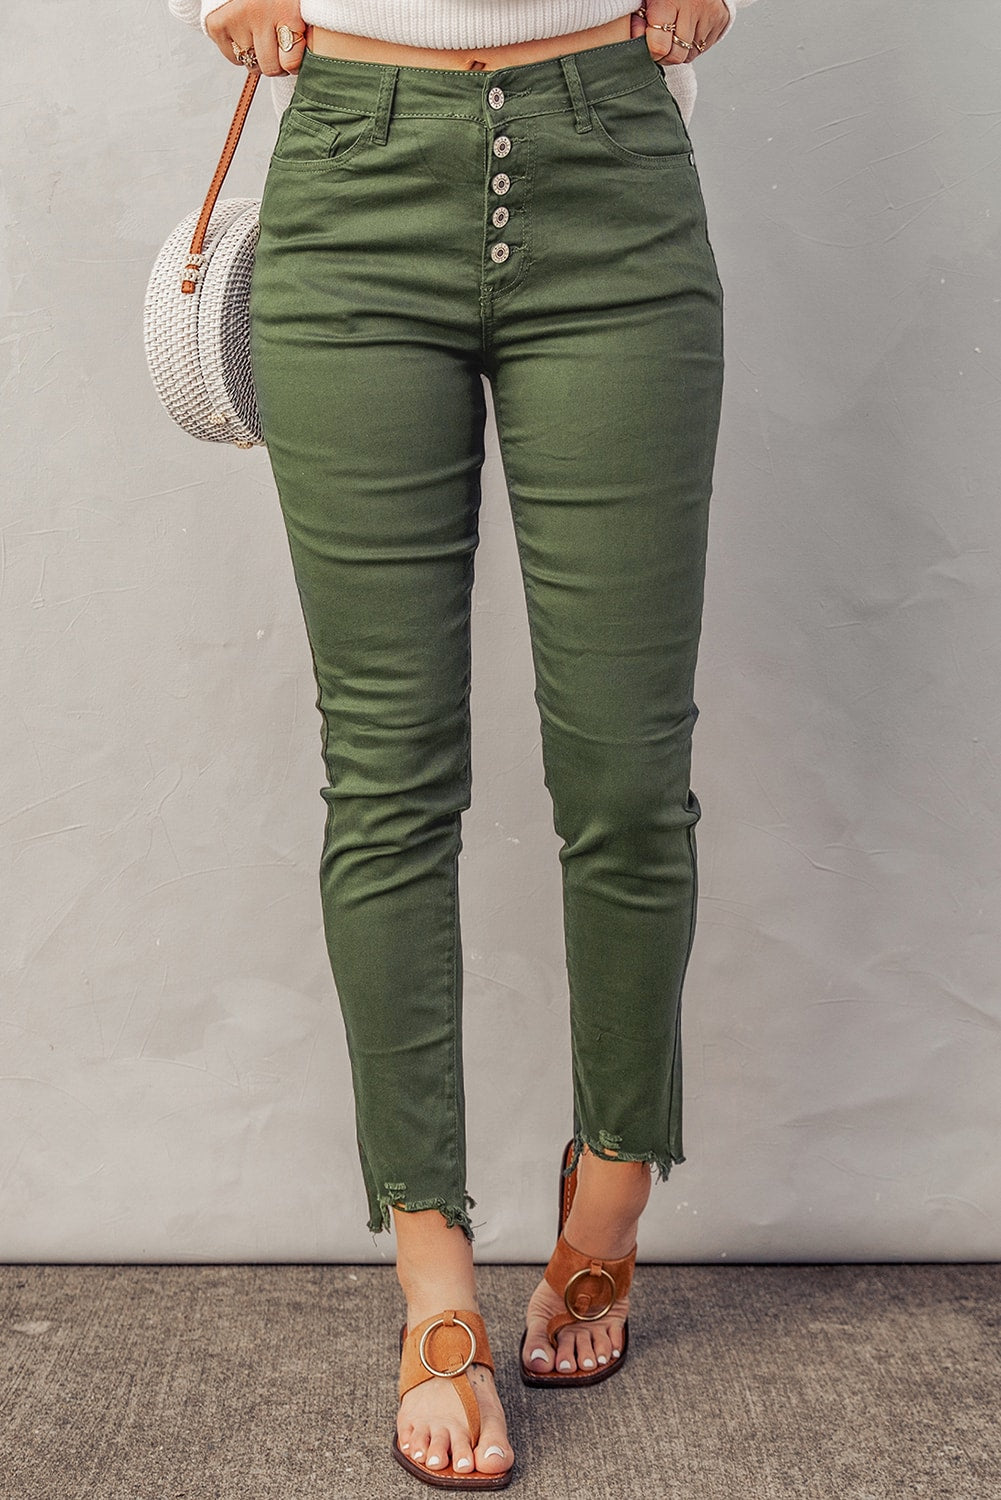 Button Fly Hem Detail Skinny Jeans -  Nueva Moda Boutique By Giselly 